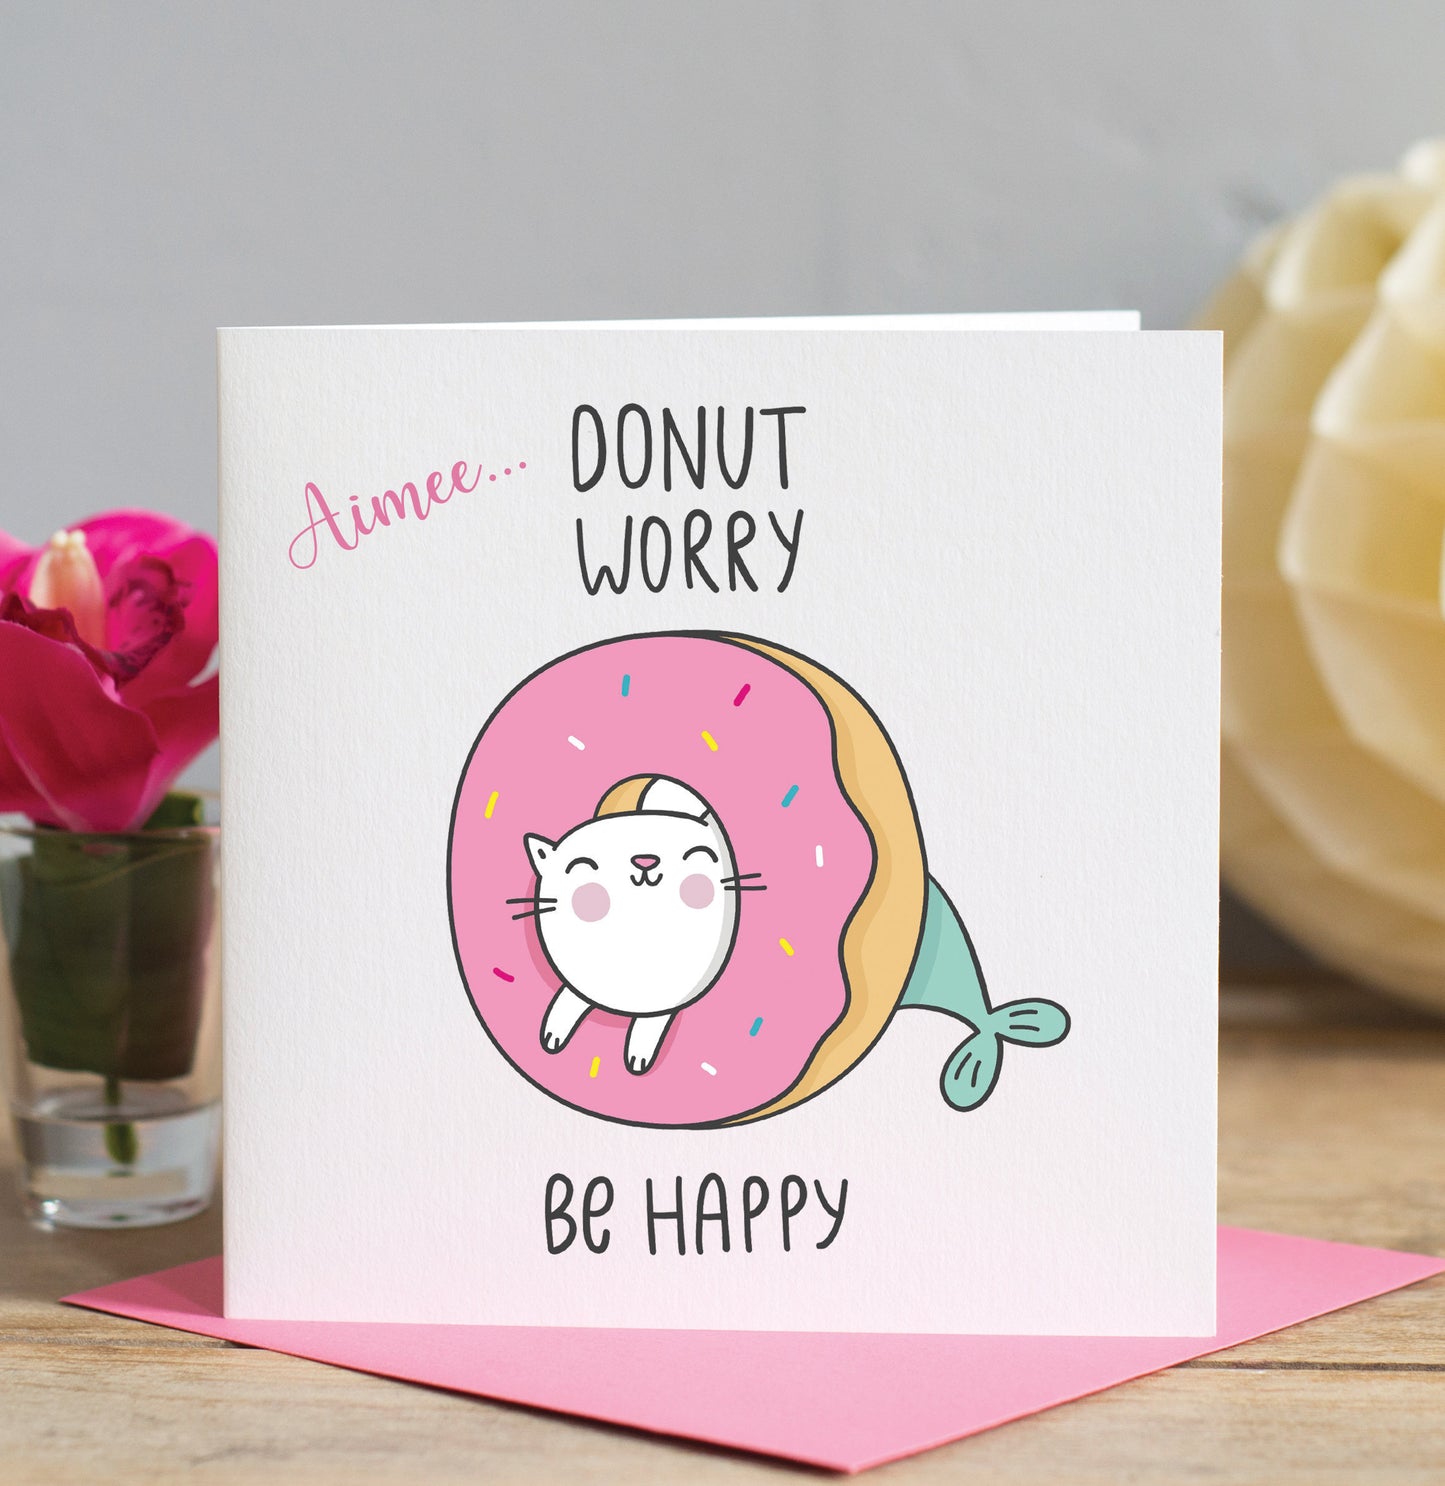 Donut Worry, Be Happy Pun Card